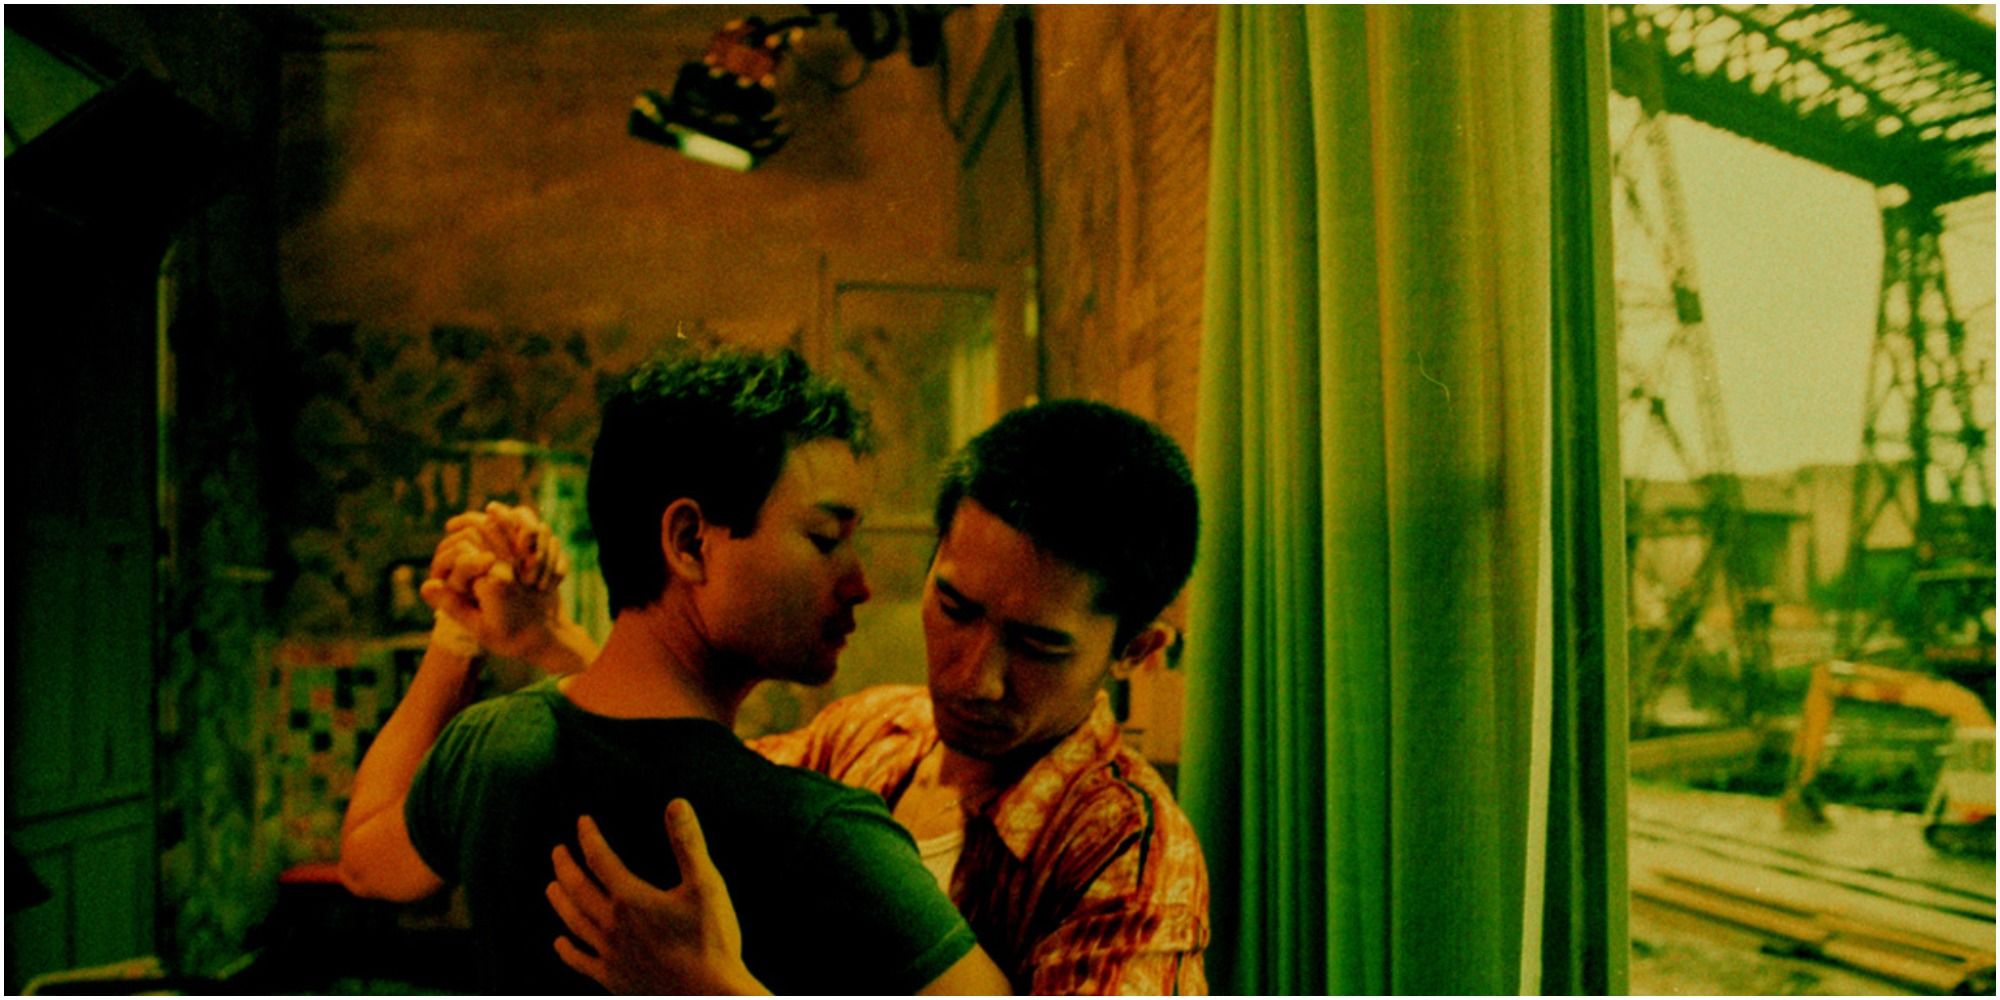 Happy Together directed by Wong Kar Wai